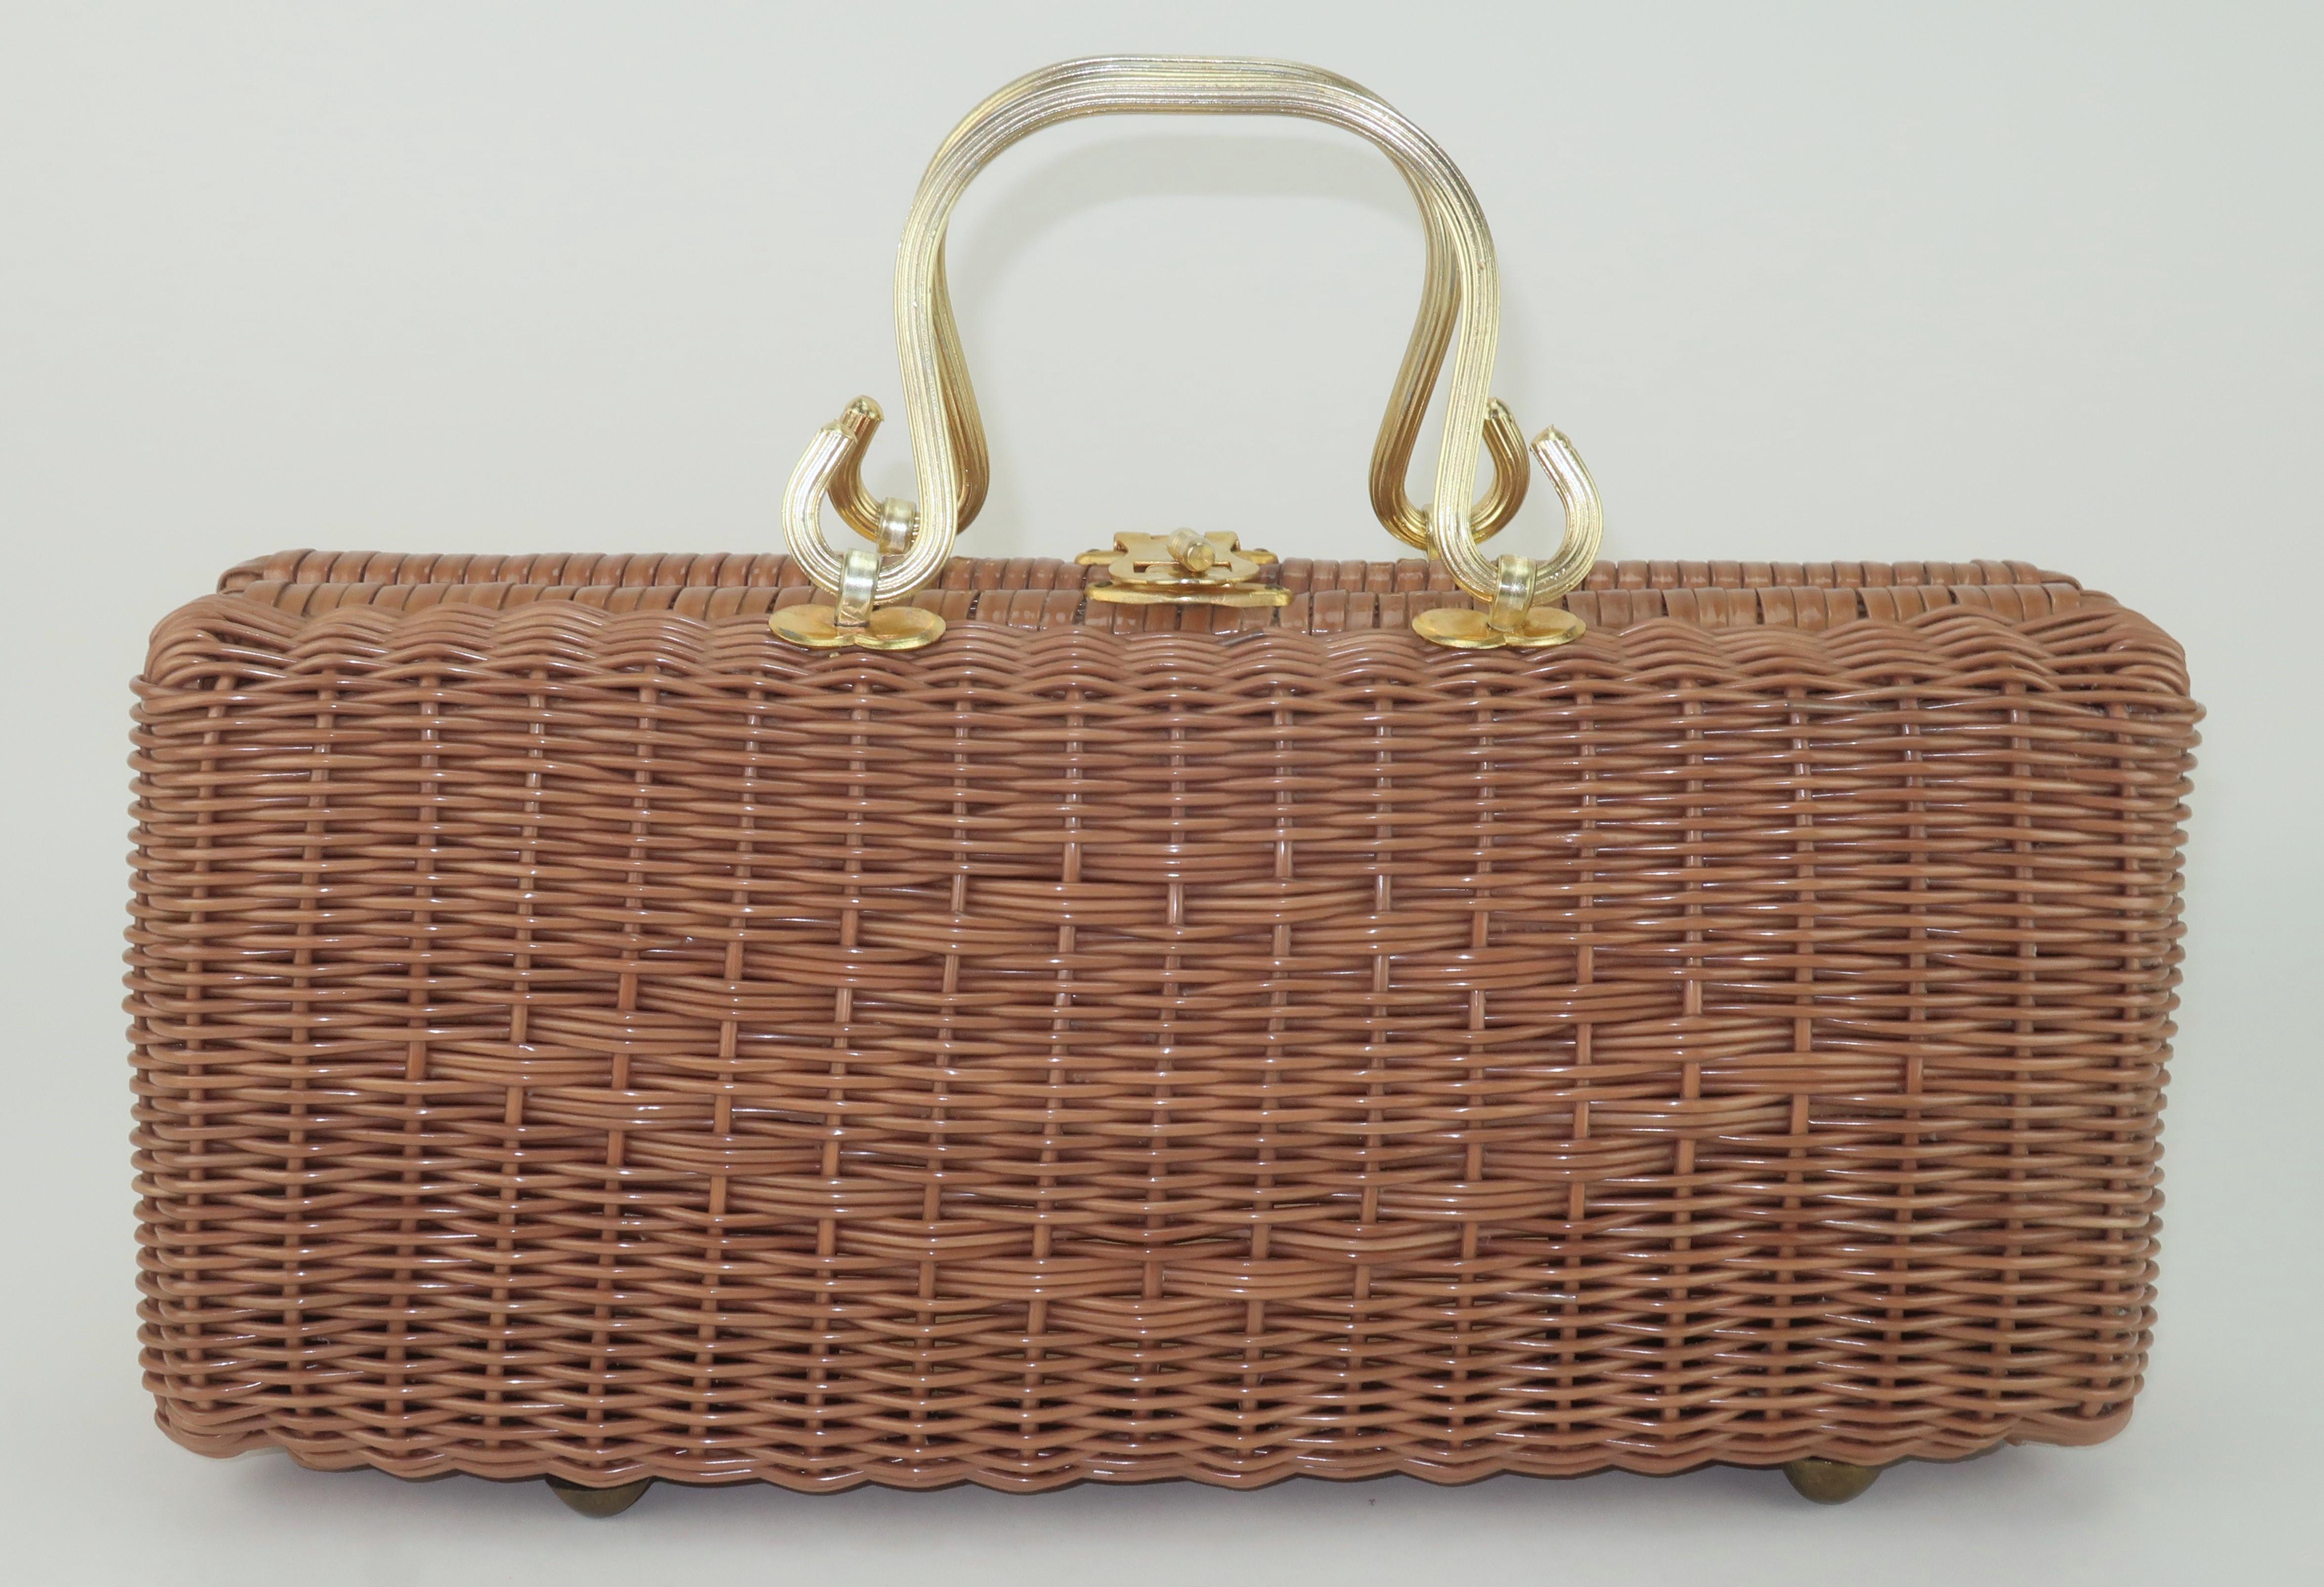 Elongated Straw Handbag With Gold Handles, 1960's For Sale 2